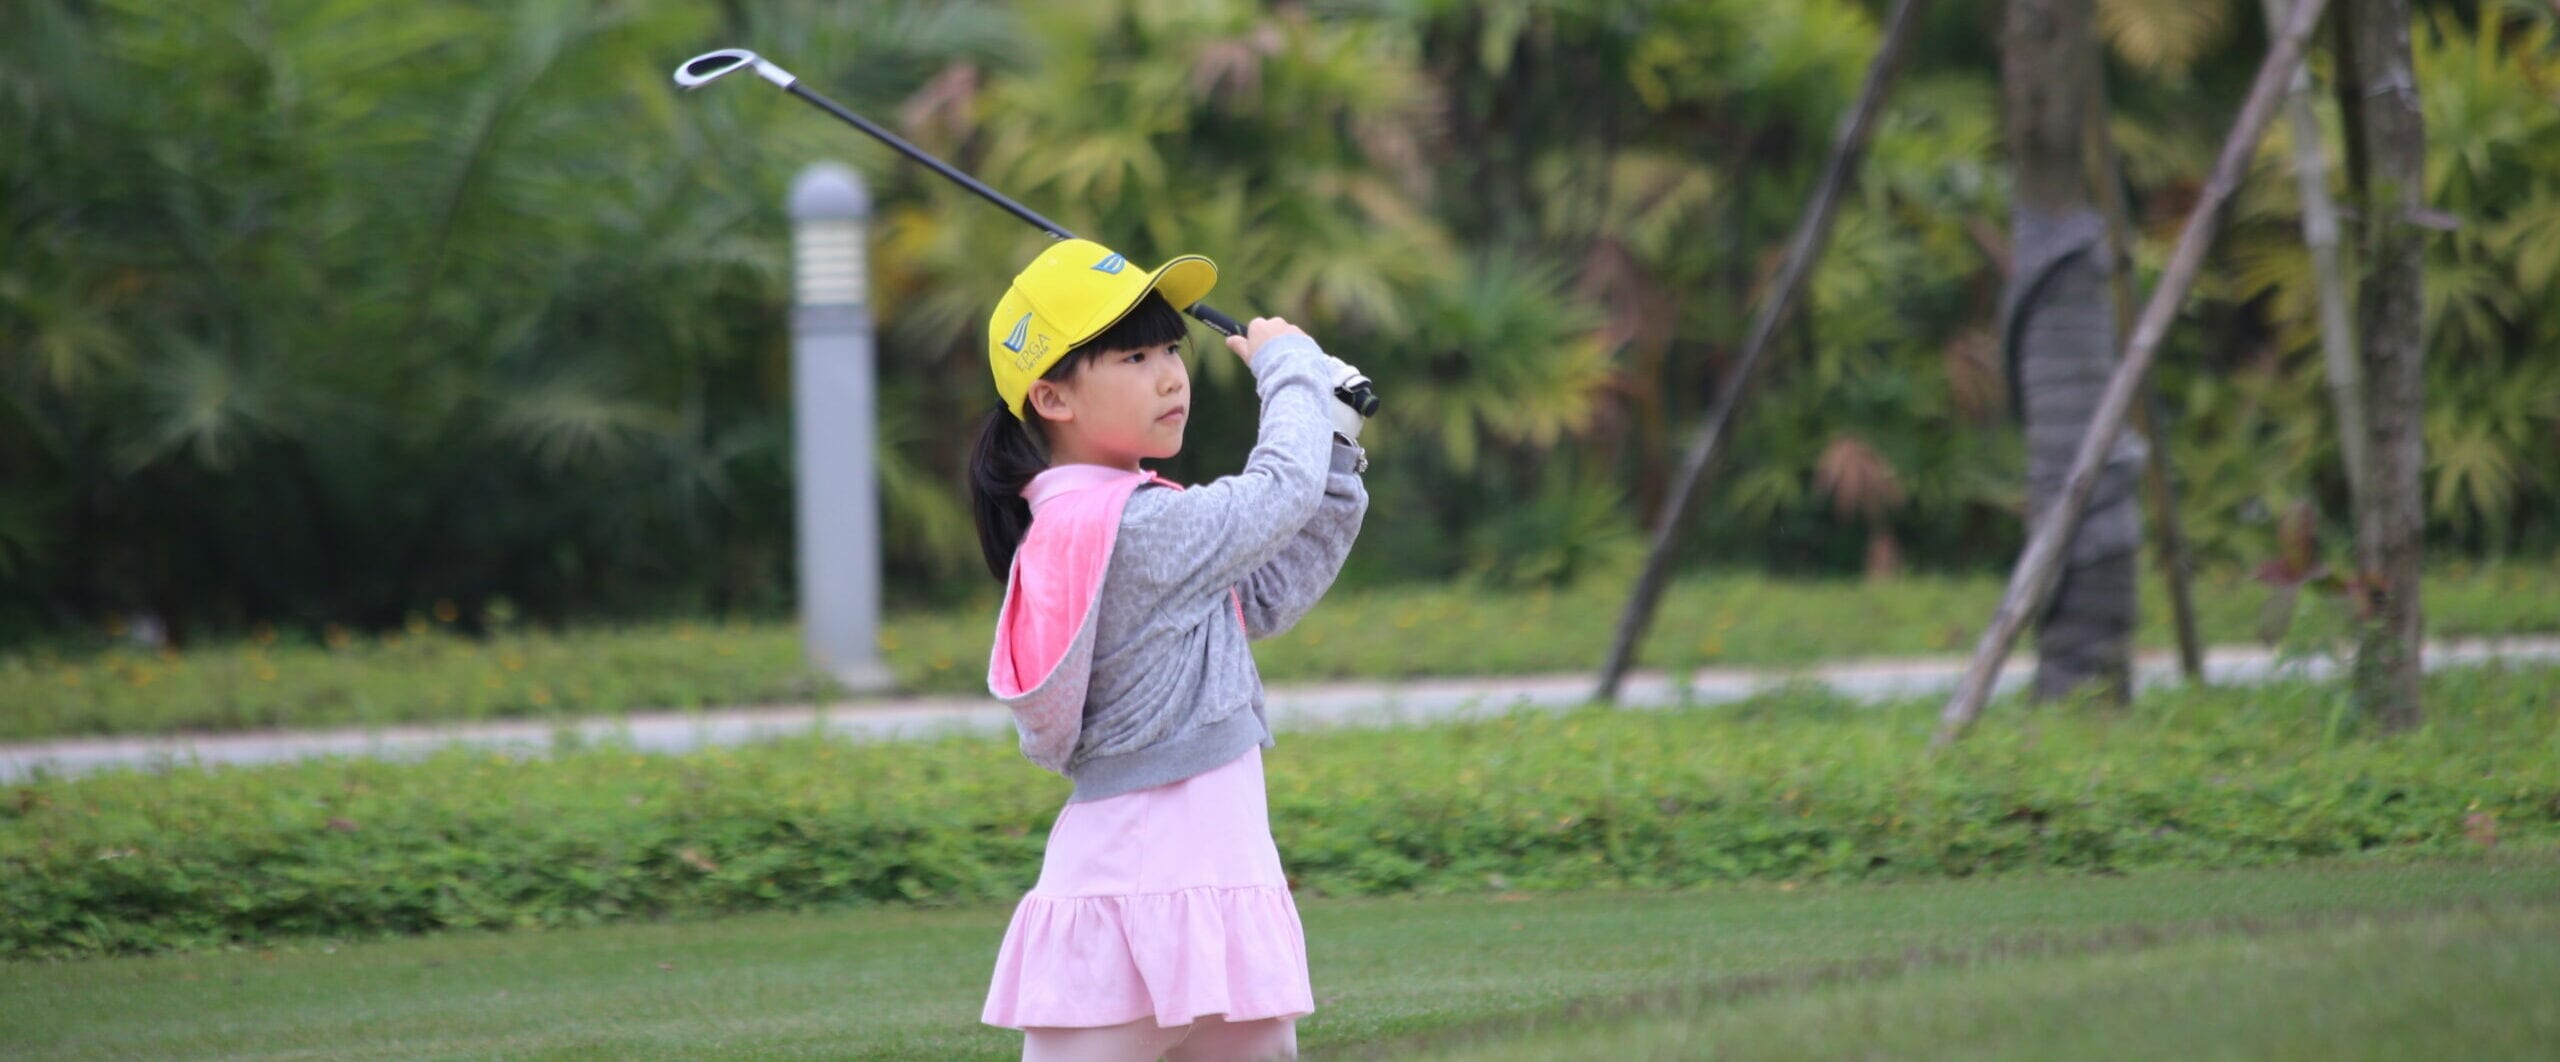 young girl swinging a golf club on grassy course